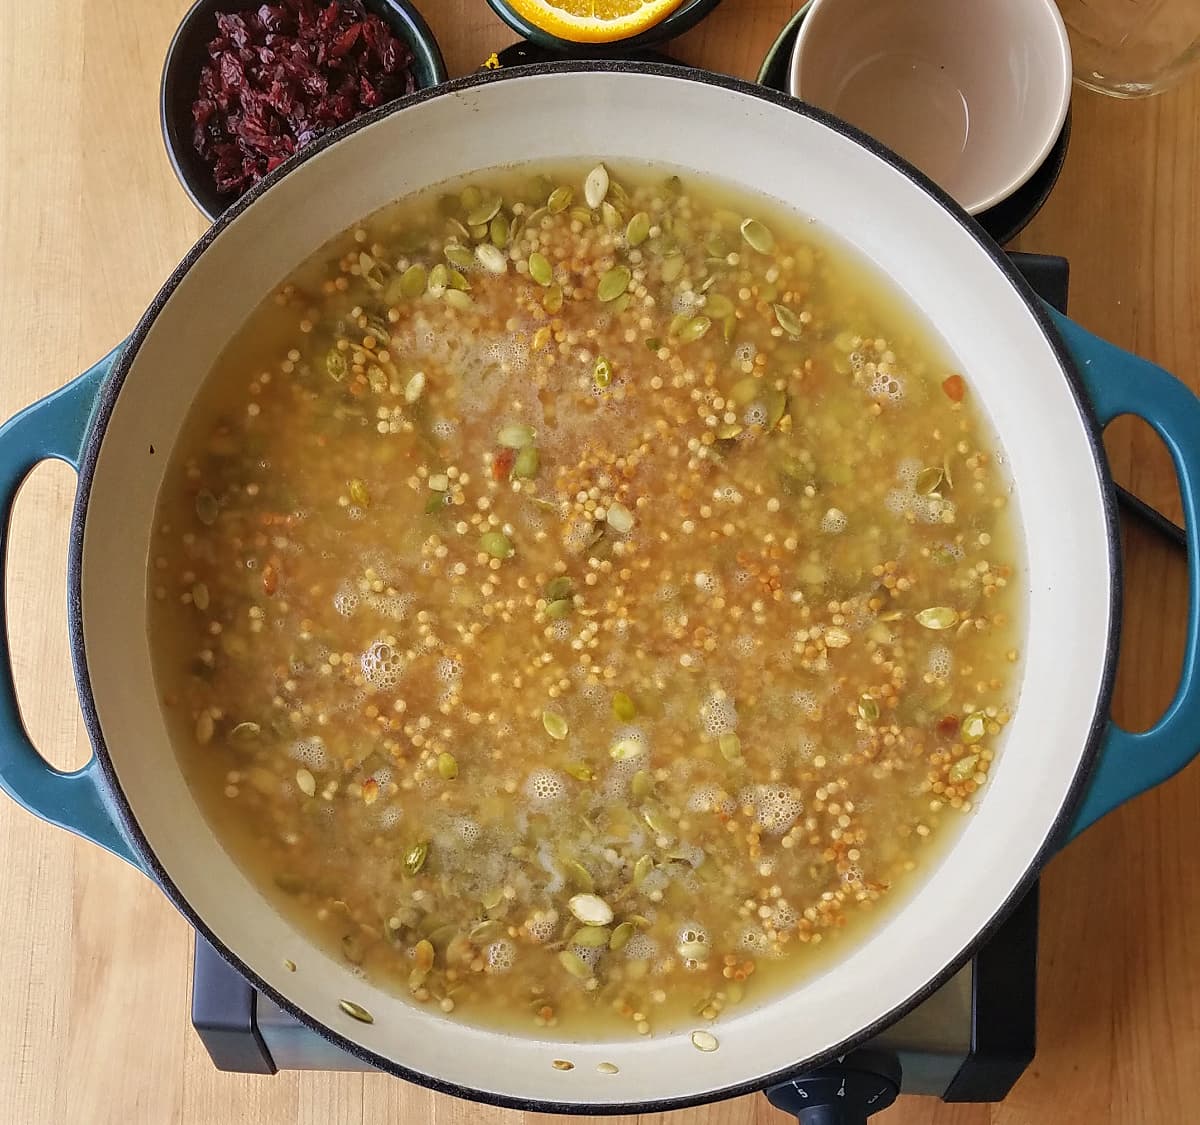 Broth added to skillet, with couscous and other ingredients submerged in broth.